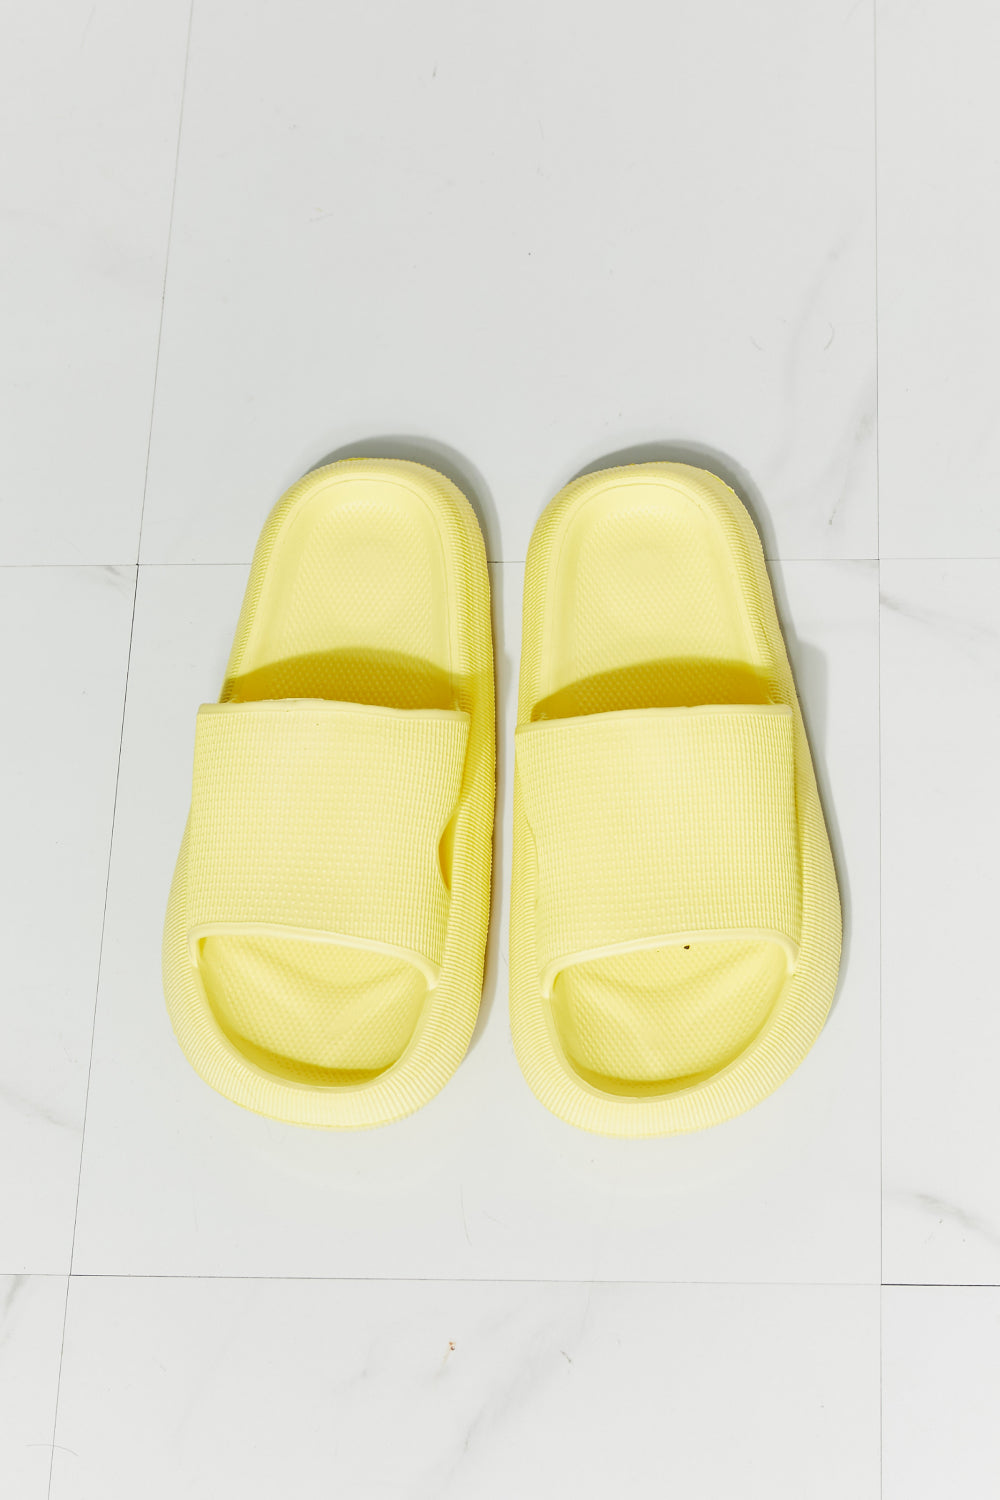 Light Gray MMShoes Arms Around Me Open Toe Slide in Yellow Accessories